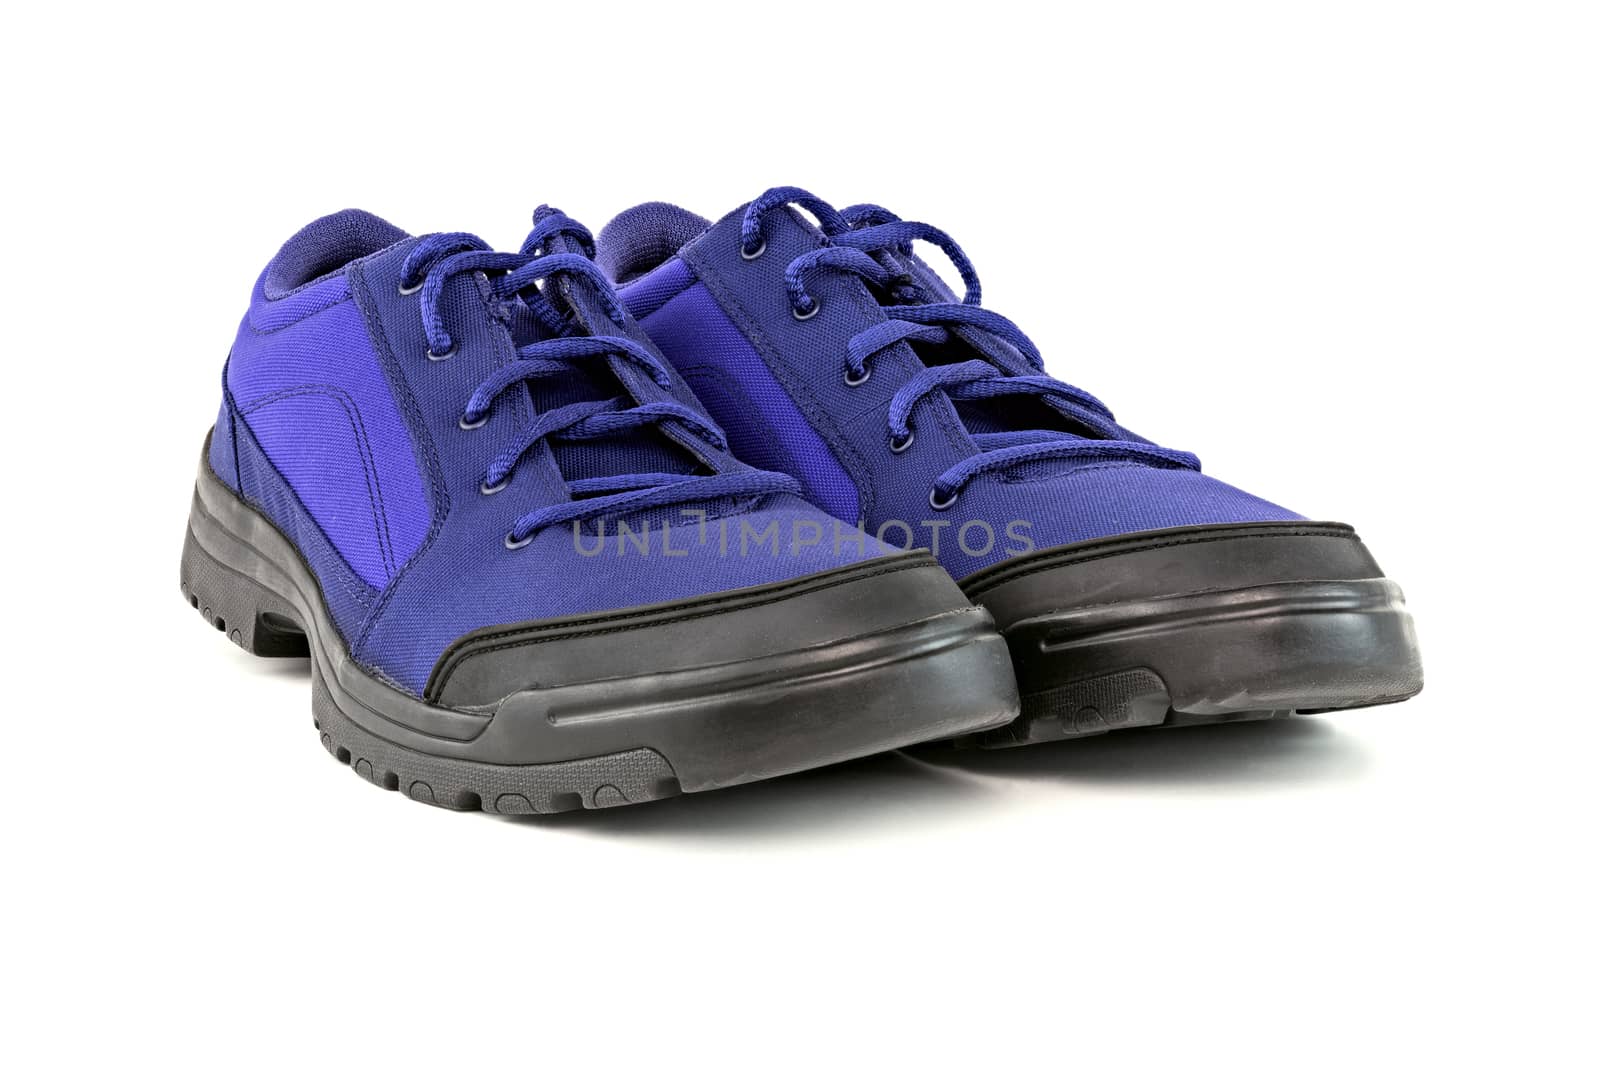 a pair of blue cheap durable fabric travel shoes isolated on white background.